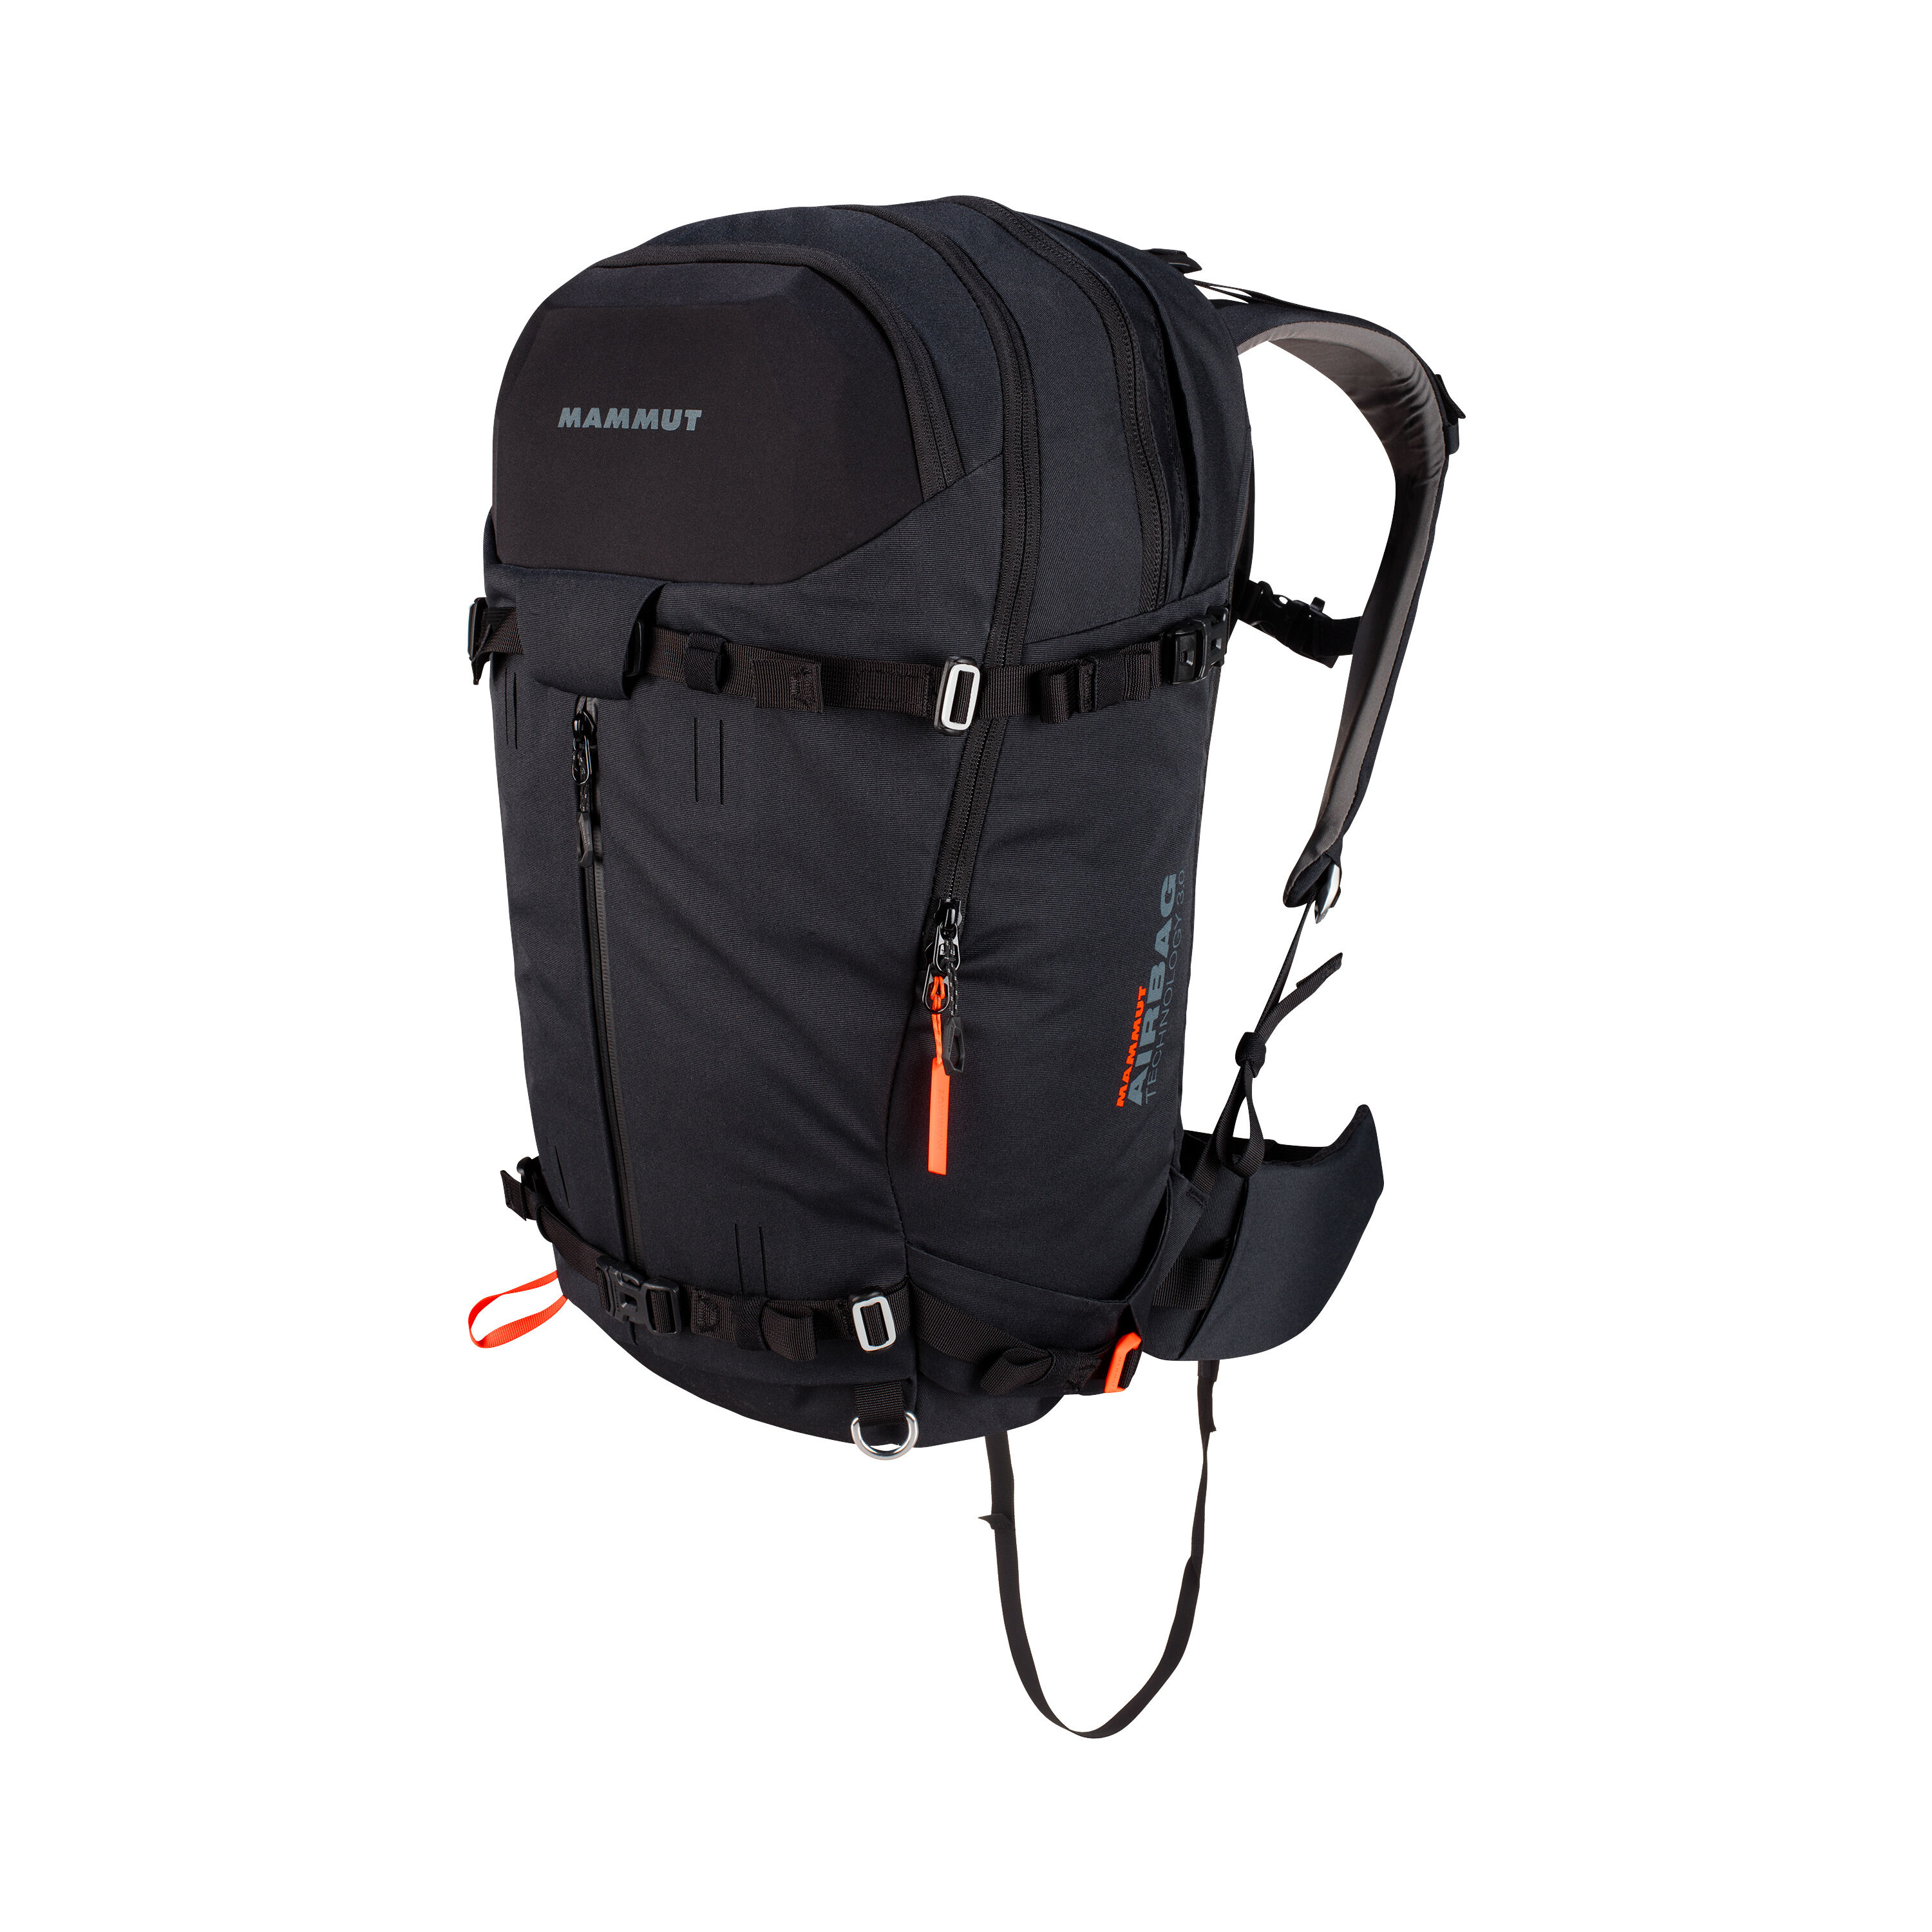 Mammut Pro X Removable Airbag 3.0 - Sac à dos airbag | Hardloop